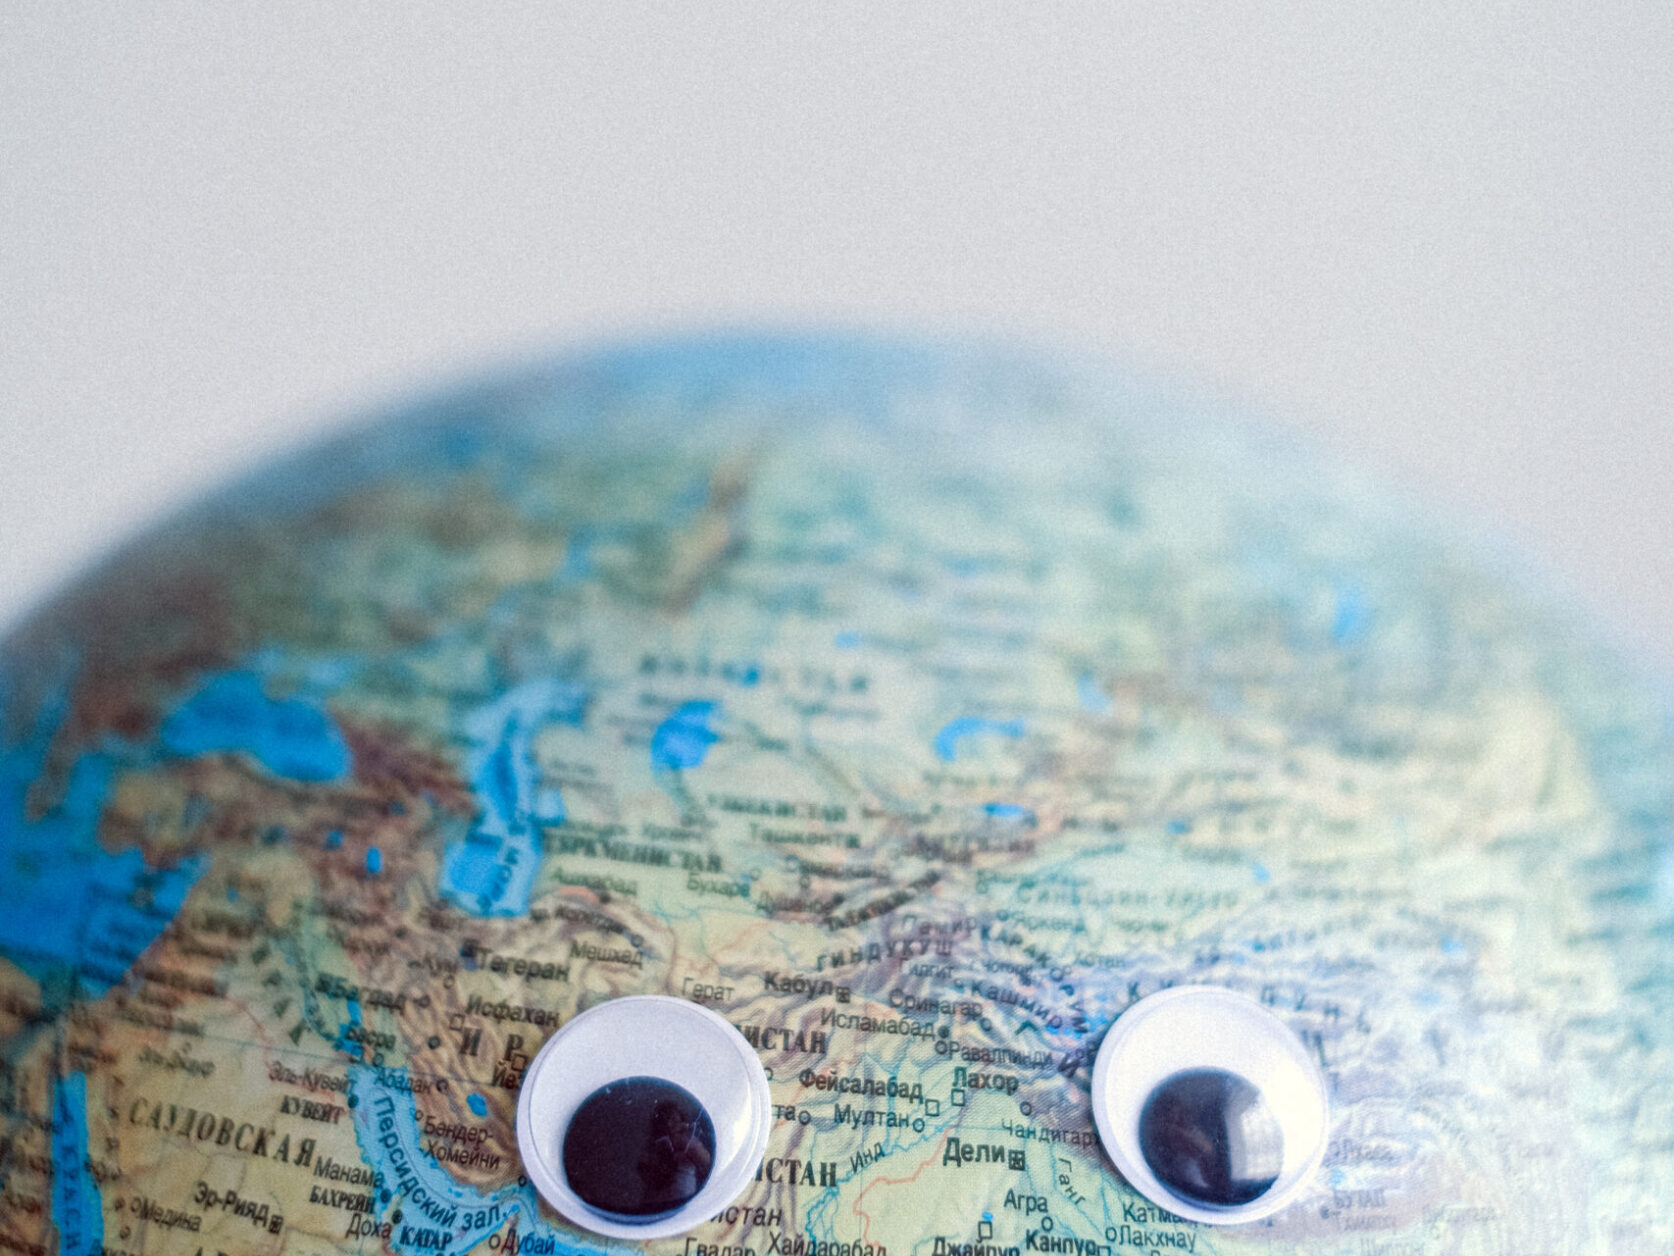 Model of globe with googly eyes representing Earth as character with need of protection